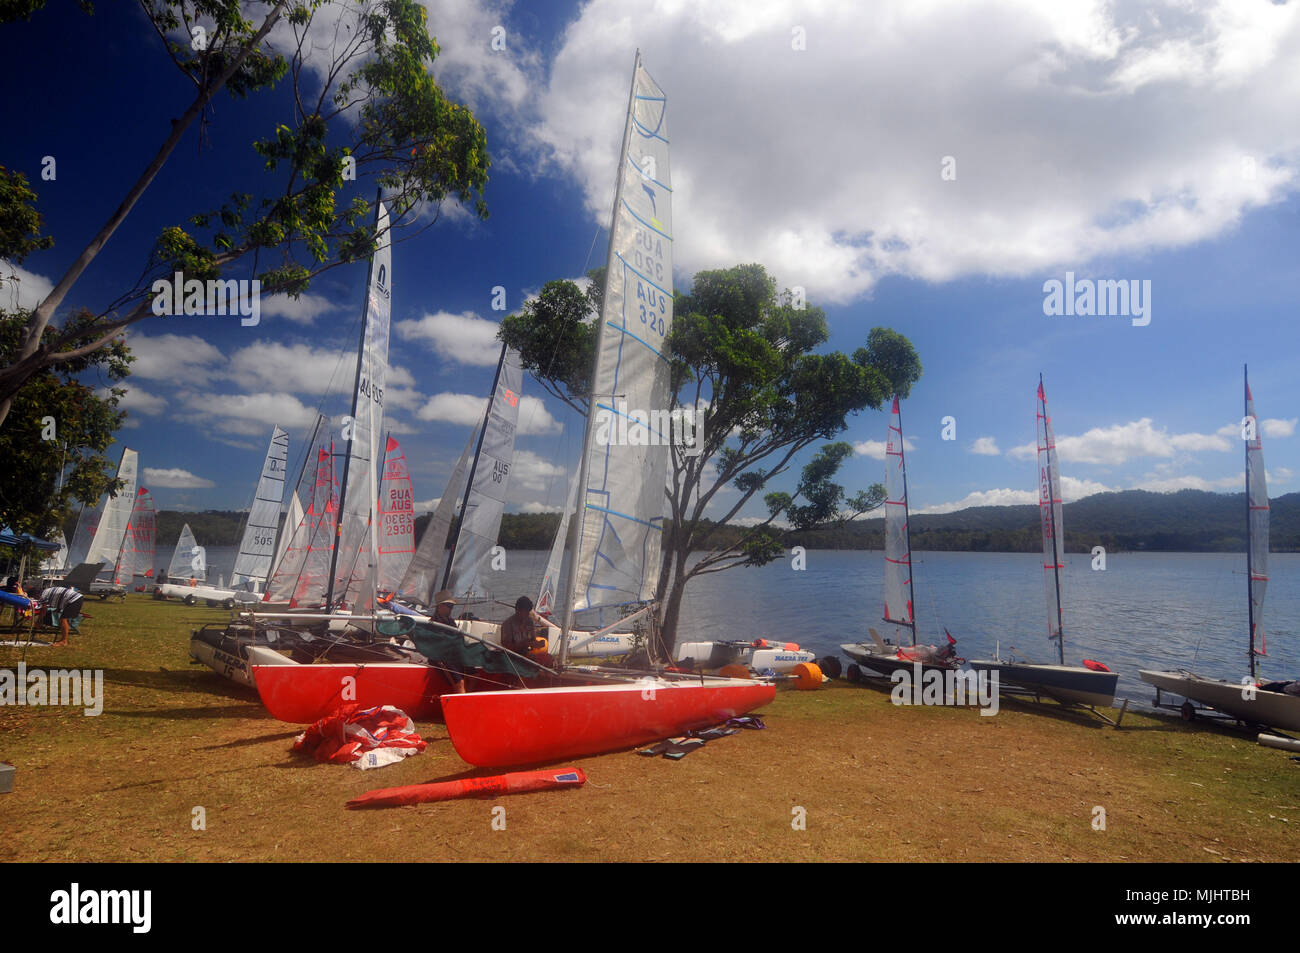 Sailing club prepares a range of dinghies and catamarans for competition day, Tinaroo Dam, Atherton Tablelands, Queensland, Australia. No MR or PR Stock Photo